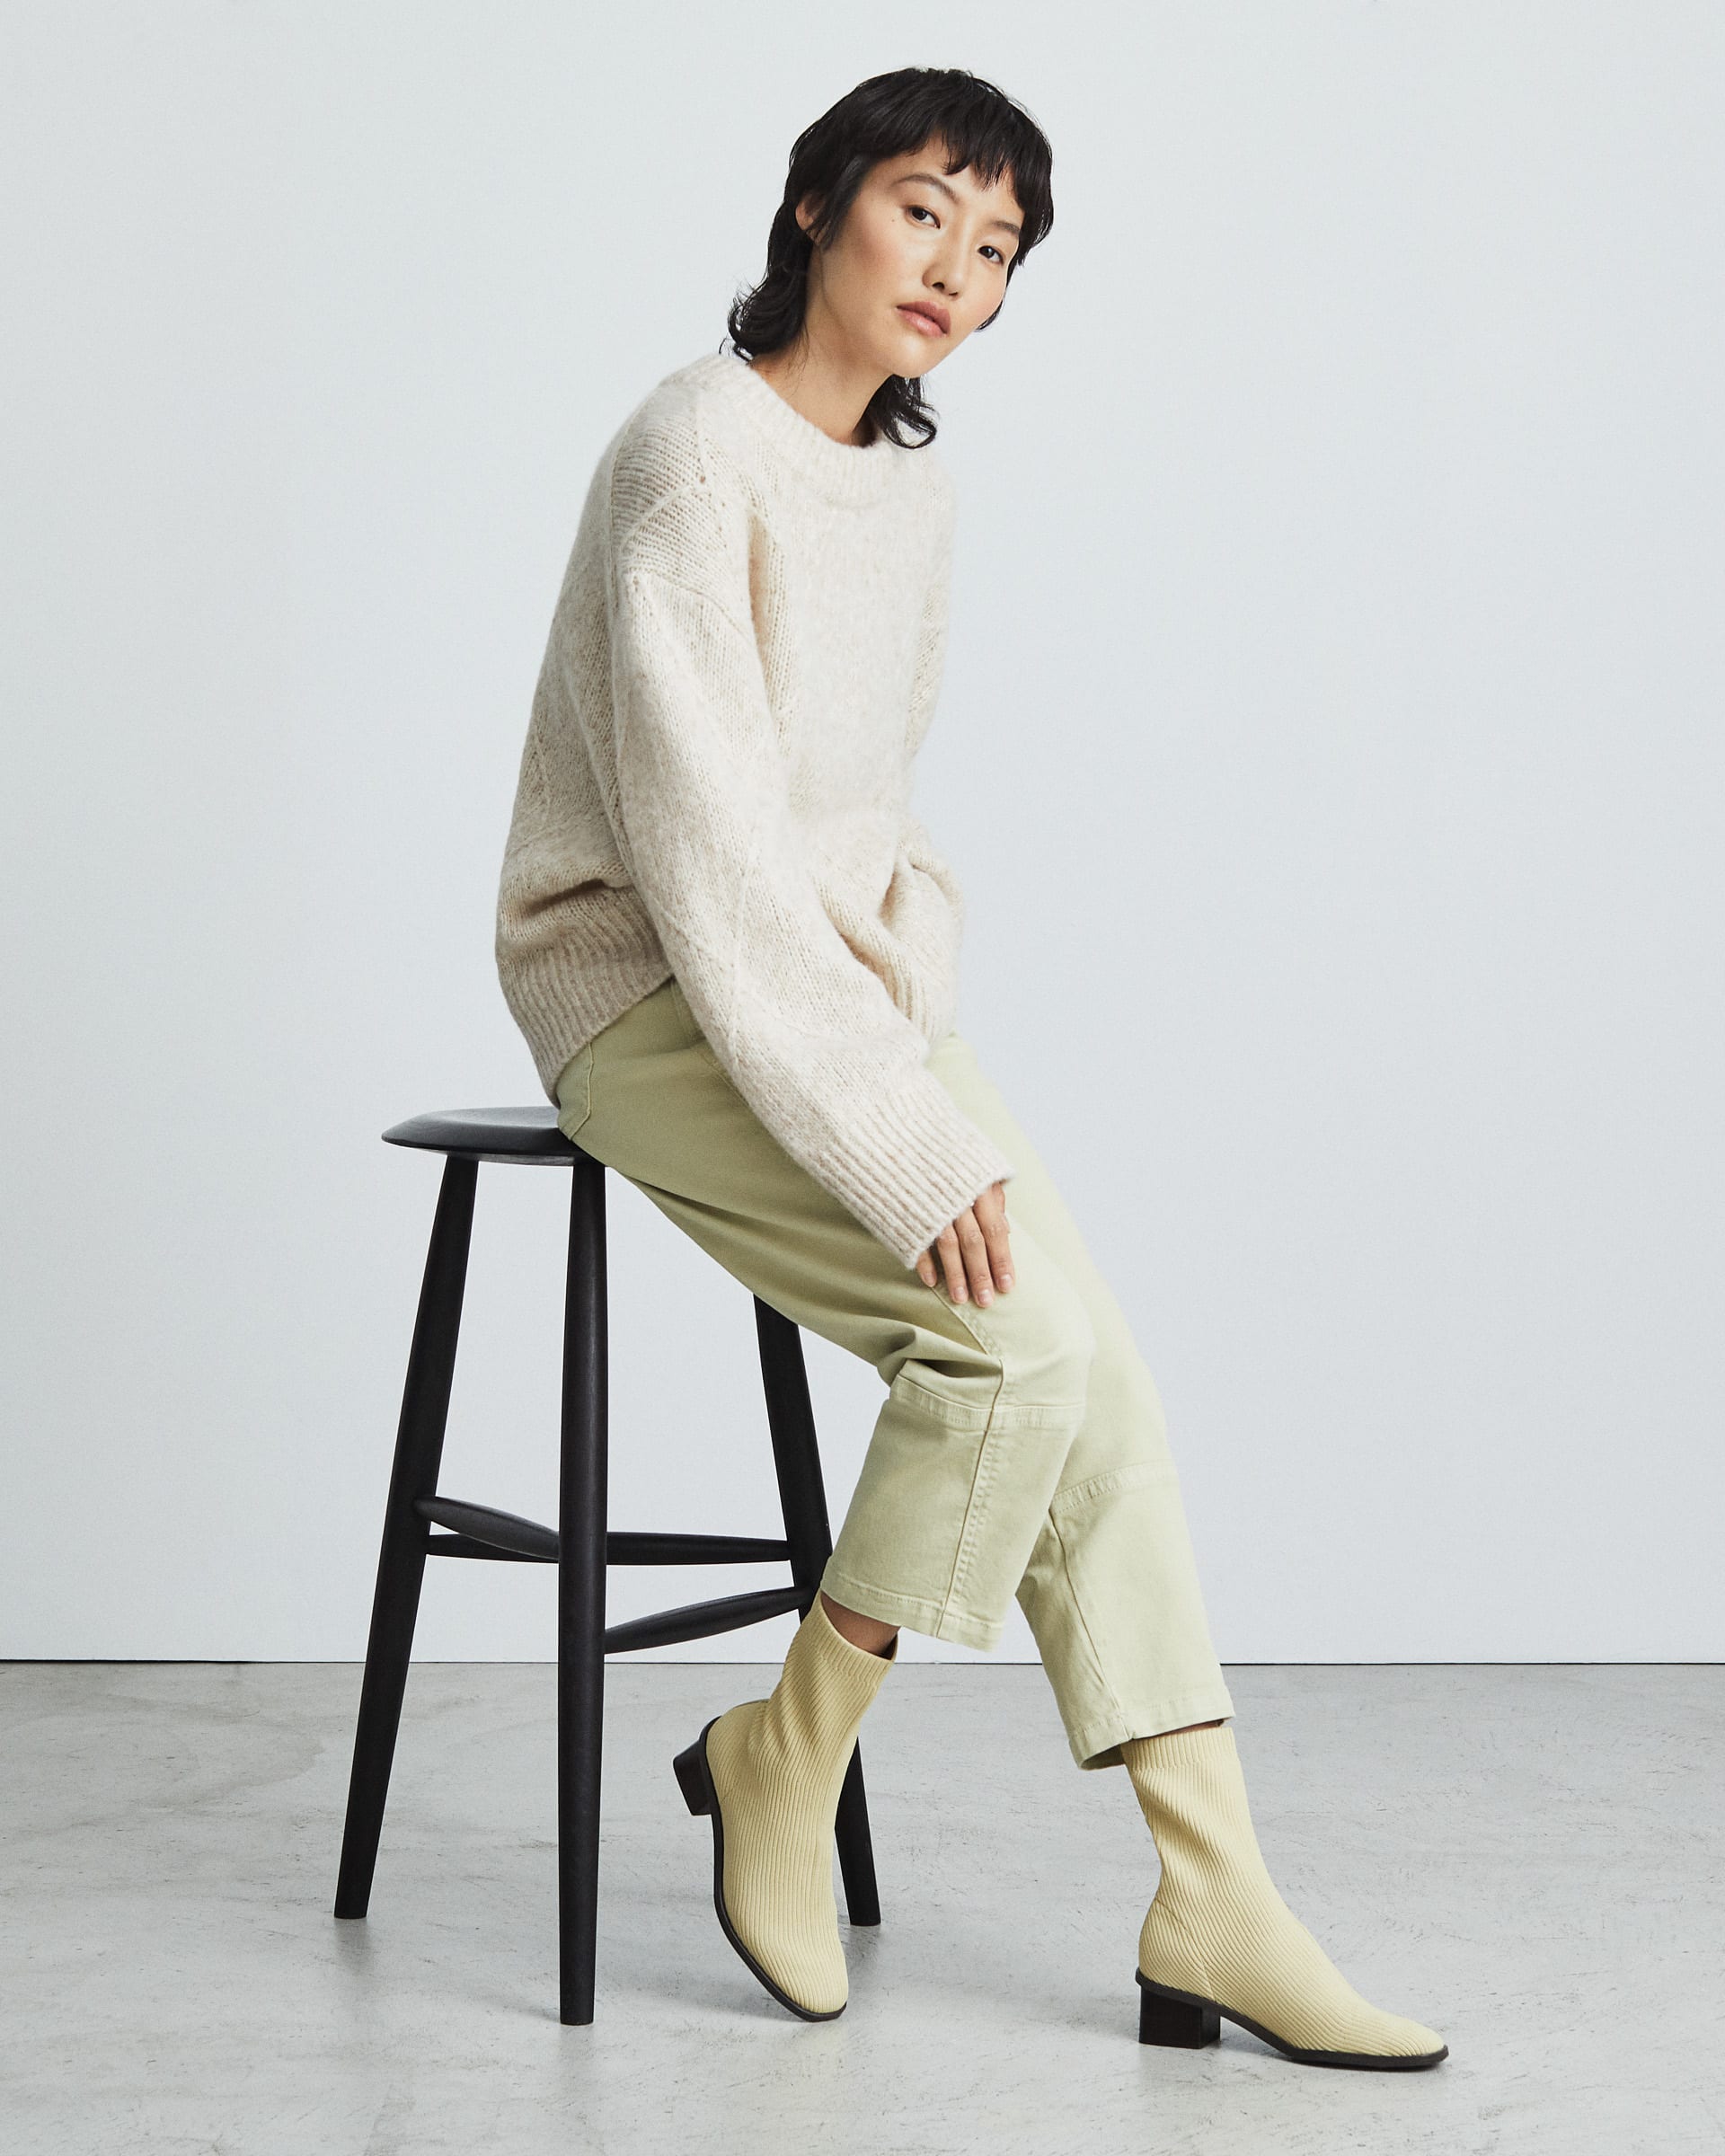 The High-Ankle Glove Boot in ReKnit® Pale Yellow – Everlane